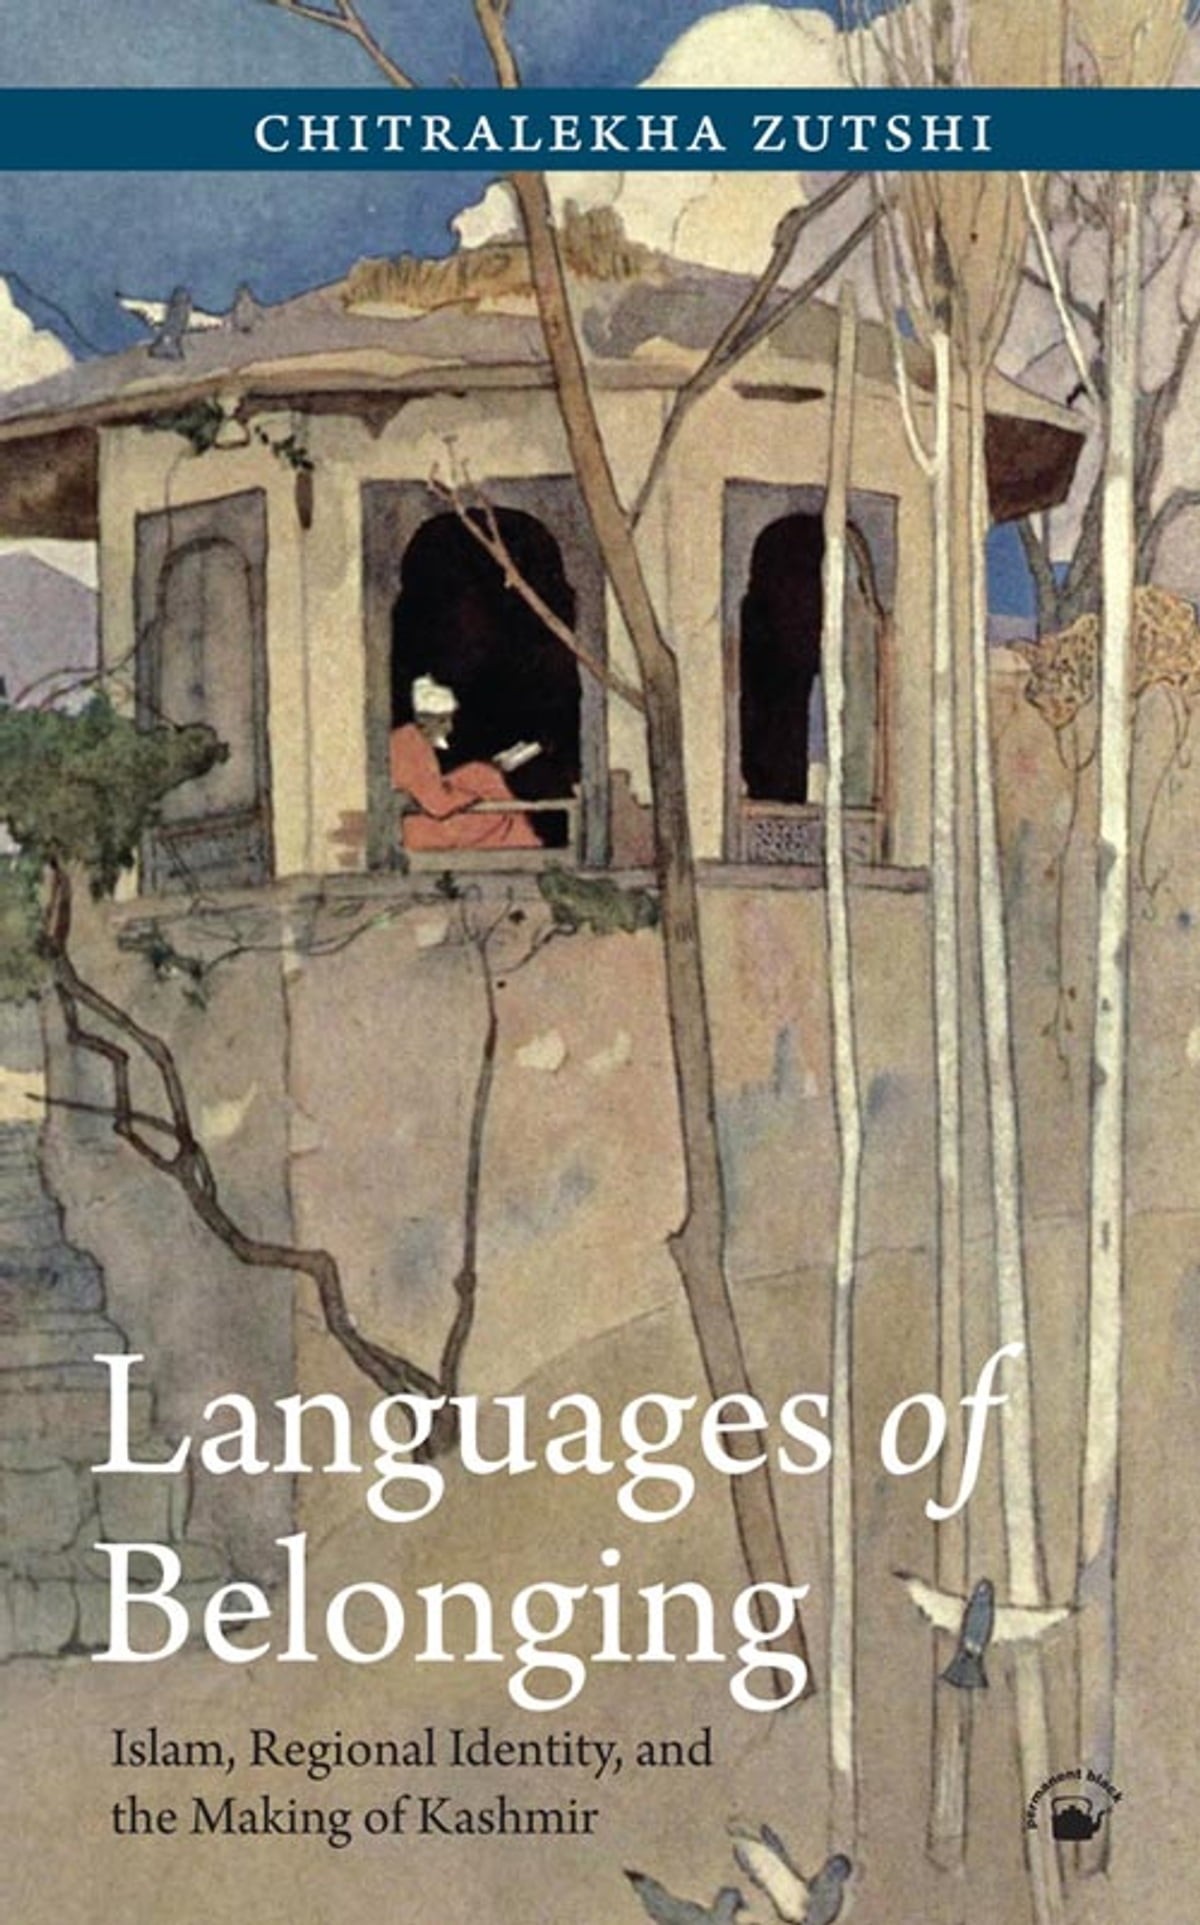 Languages of Belonging: Islam, Regional Identity, and the Making of Kashmir